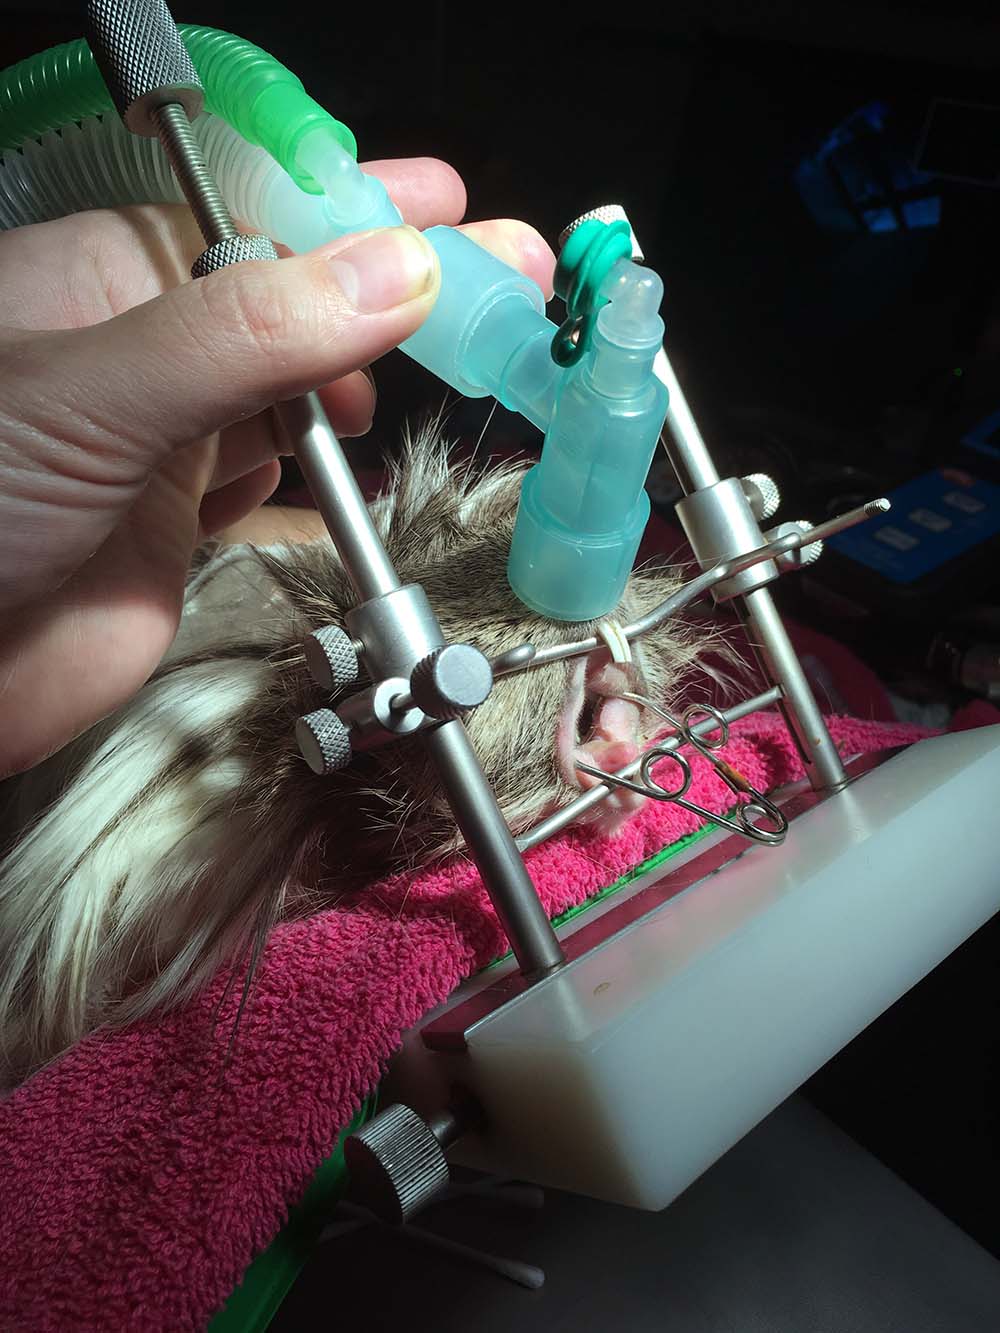 Figure 3. Full thorough oral examination can be achieved under anaesthesia using either a tabletop, as pictured, or handheld gag and cheek dilators.